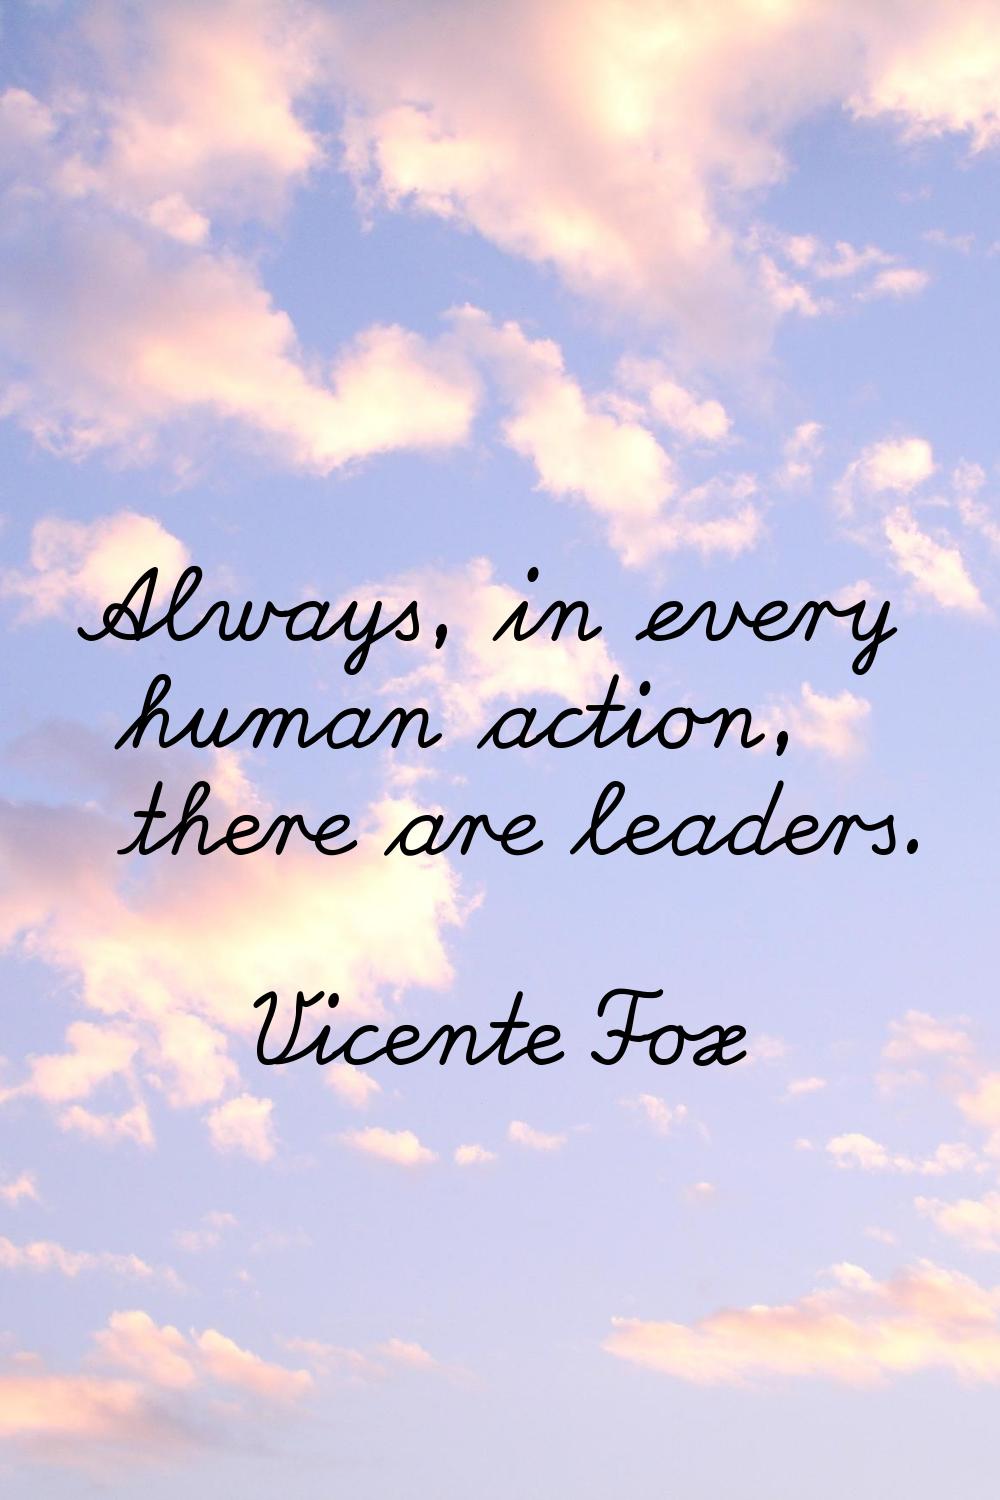 Always, in every human action, there are leaders.